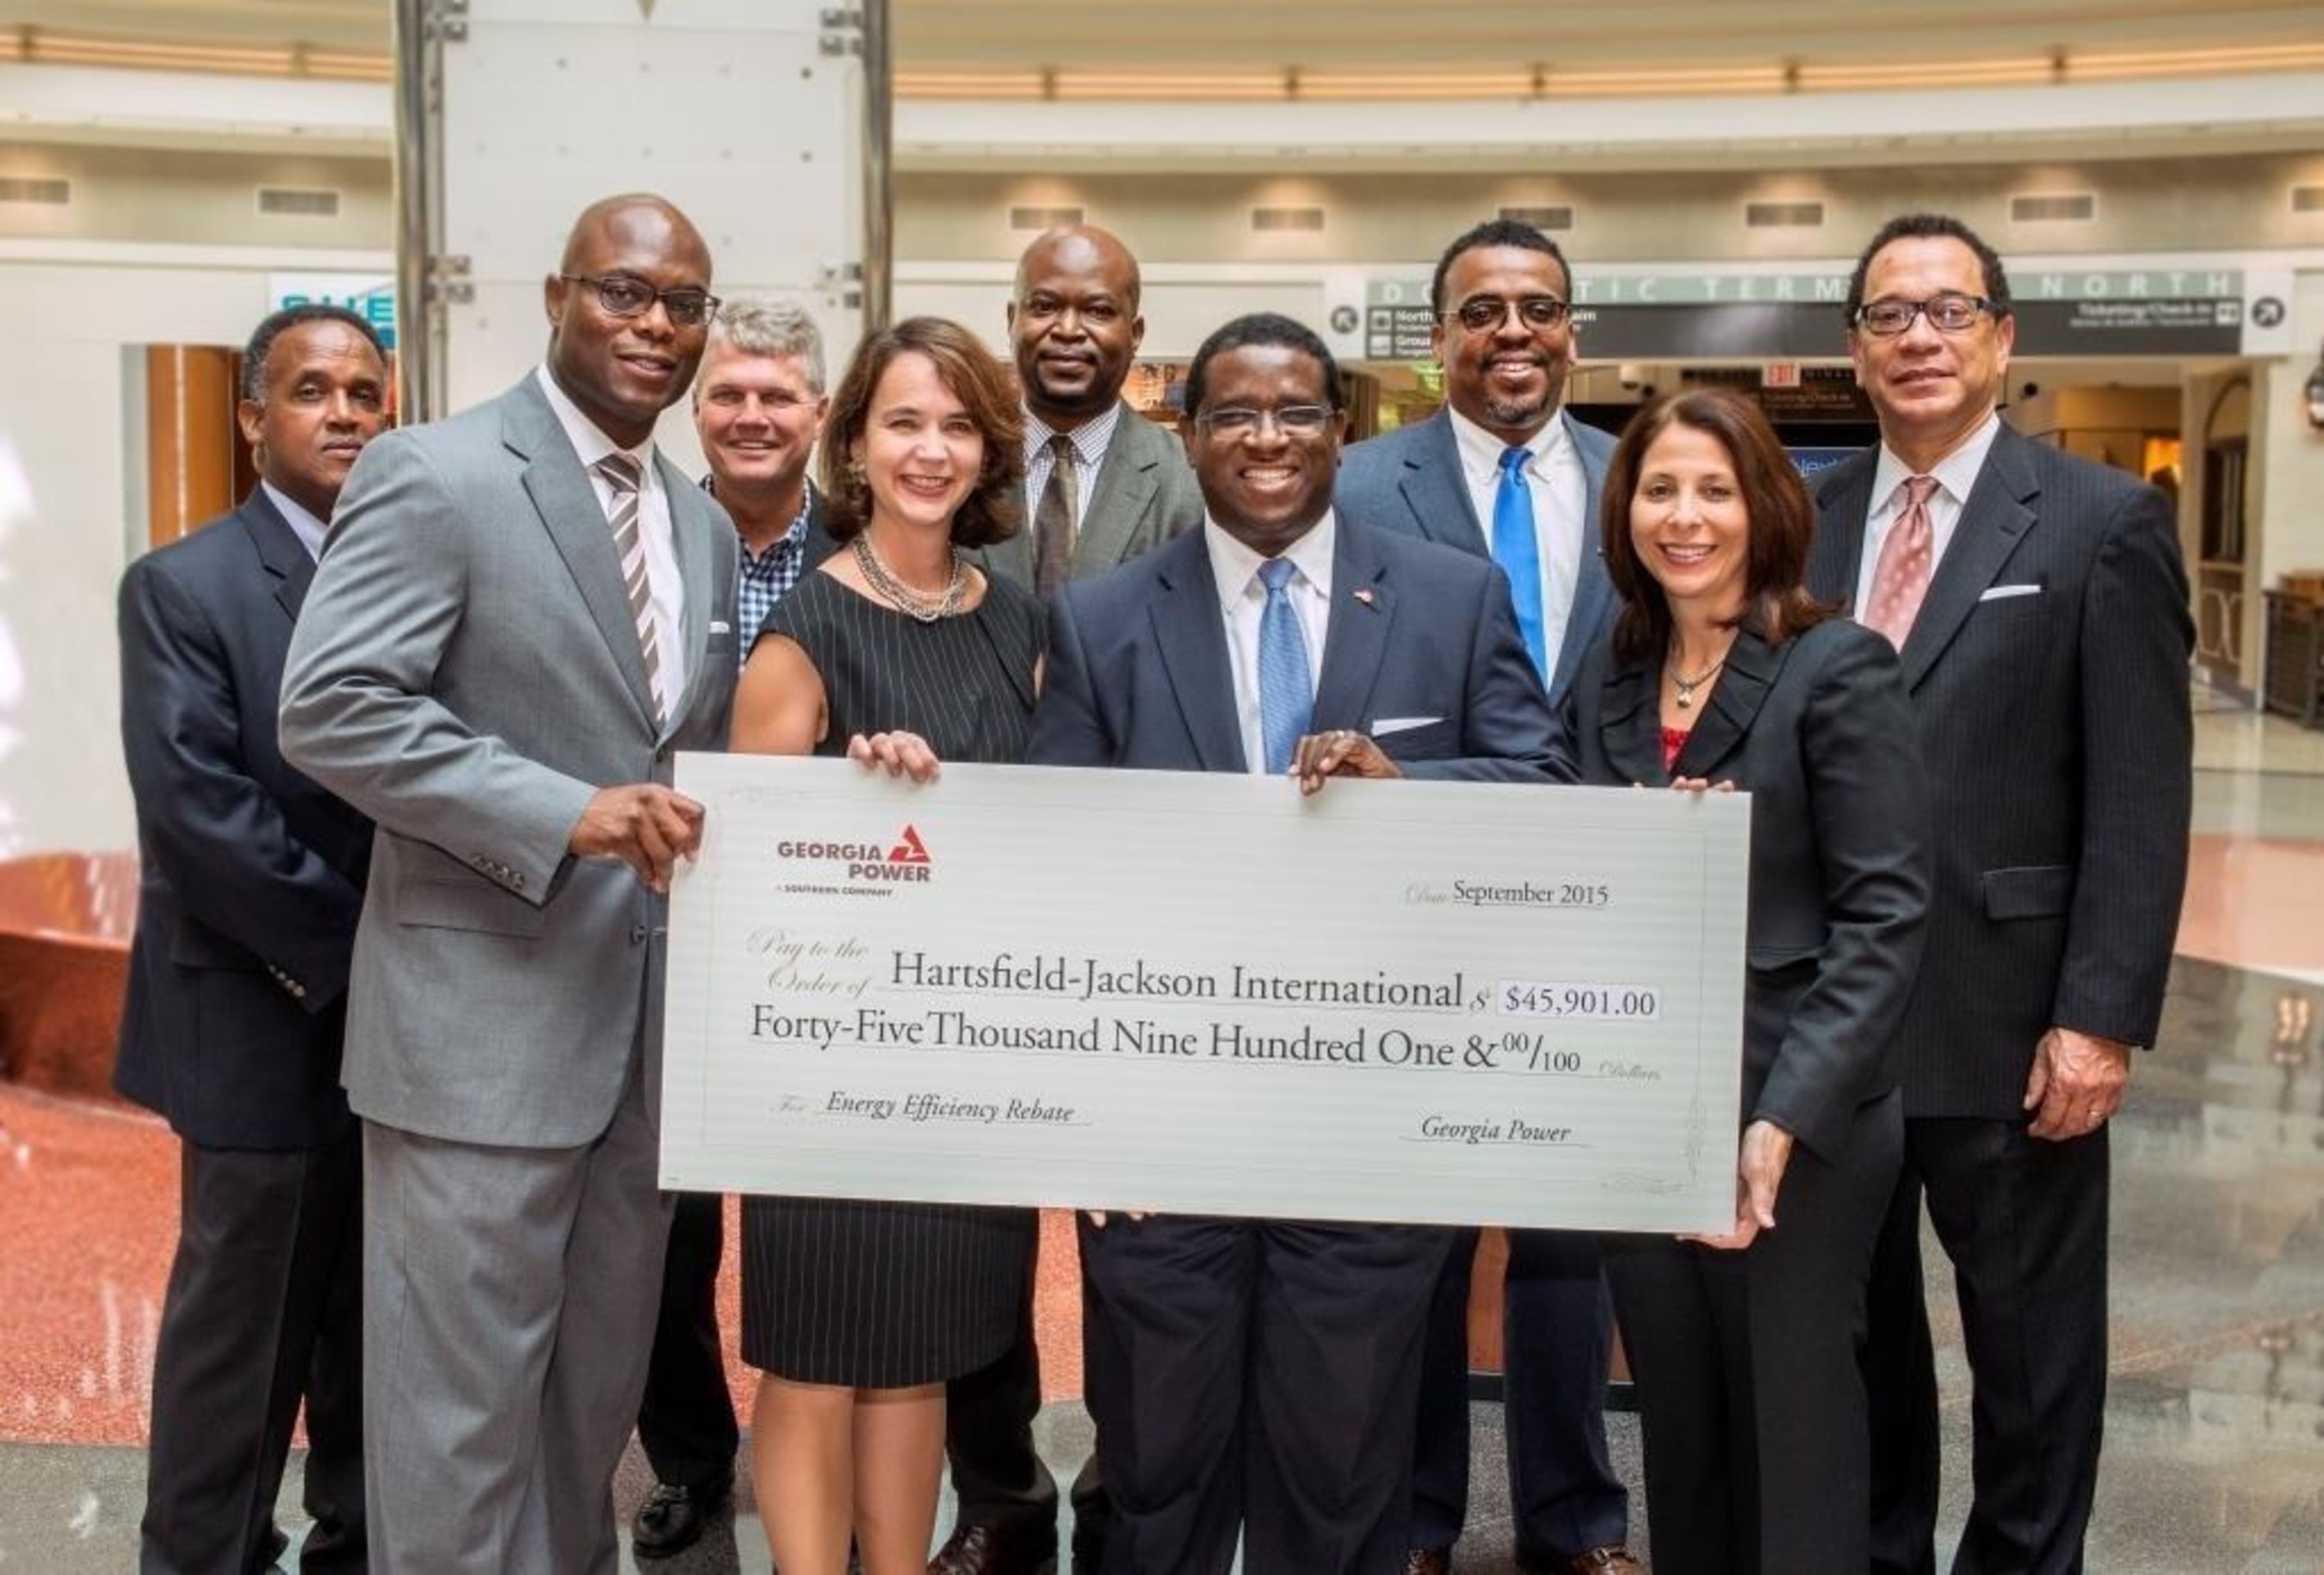 Hartsfield-Jackson Atlanta International Airport, the world's busiest airport, is working to be one of the most sustainable airports in the world through initiatives including upgrading thousands of its taxiway fixtures to energy-efficient LEDs. Georgia Power presented the airport with a nearly $46,000 rebate check in September 2015.